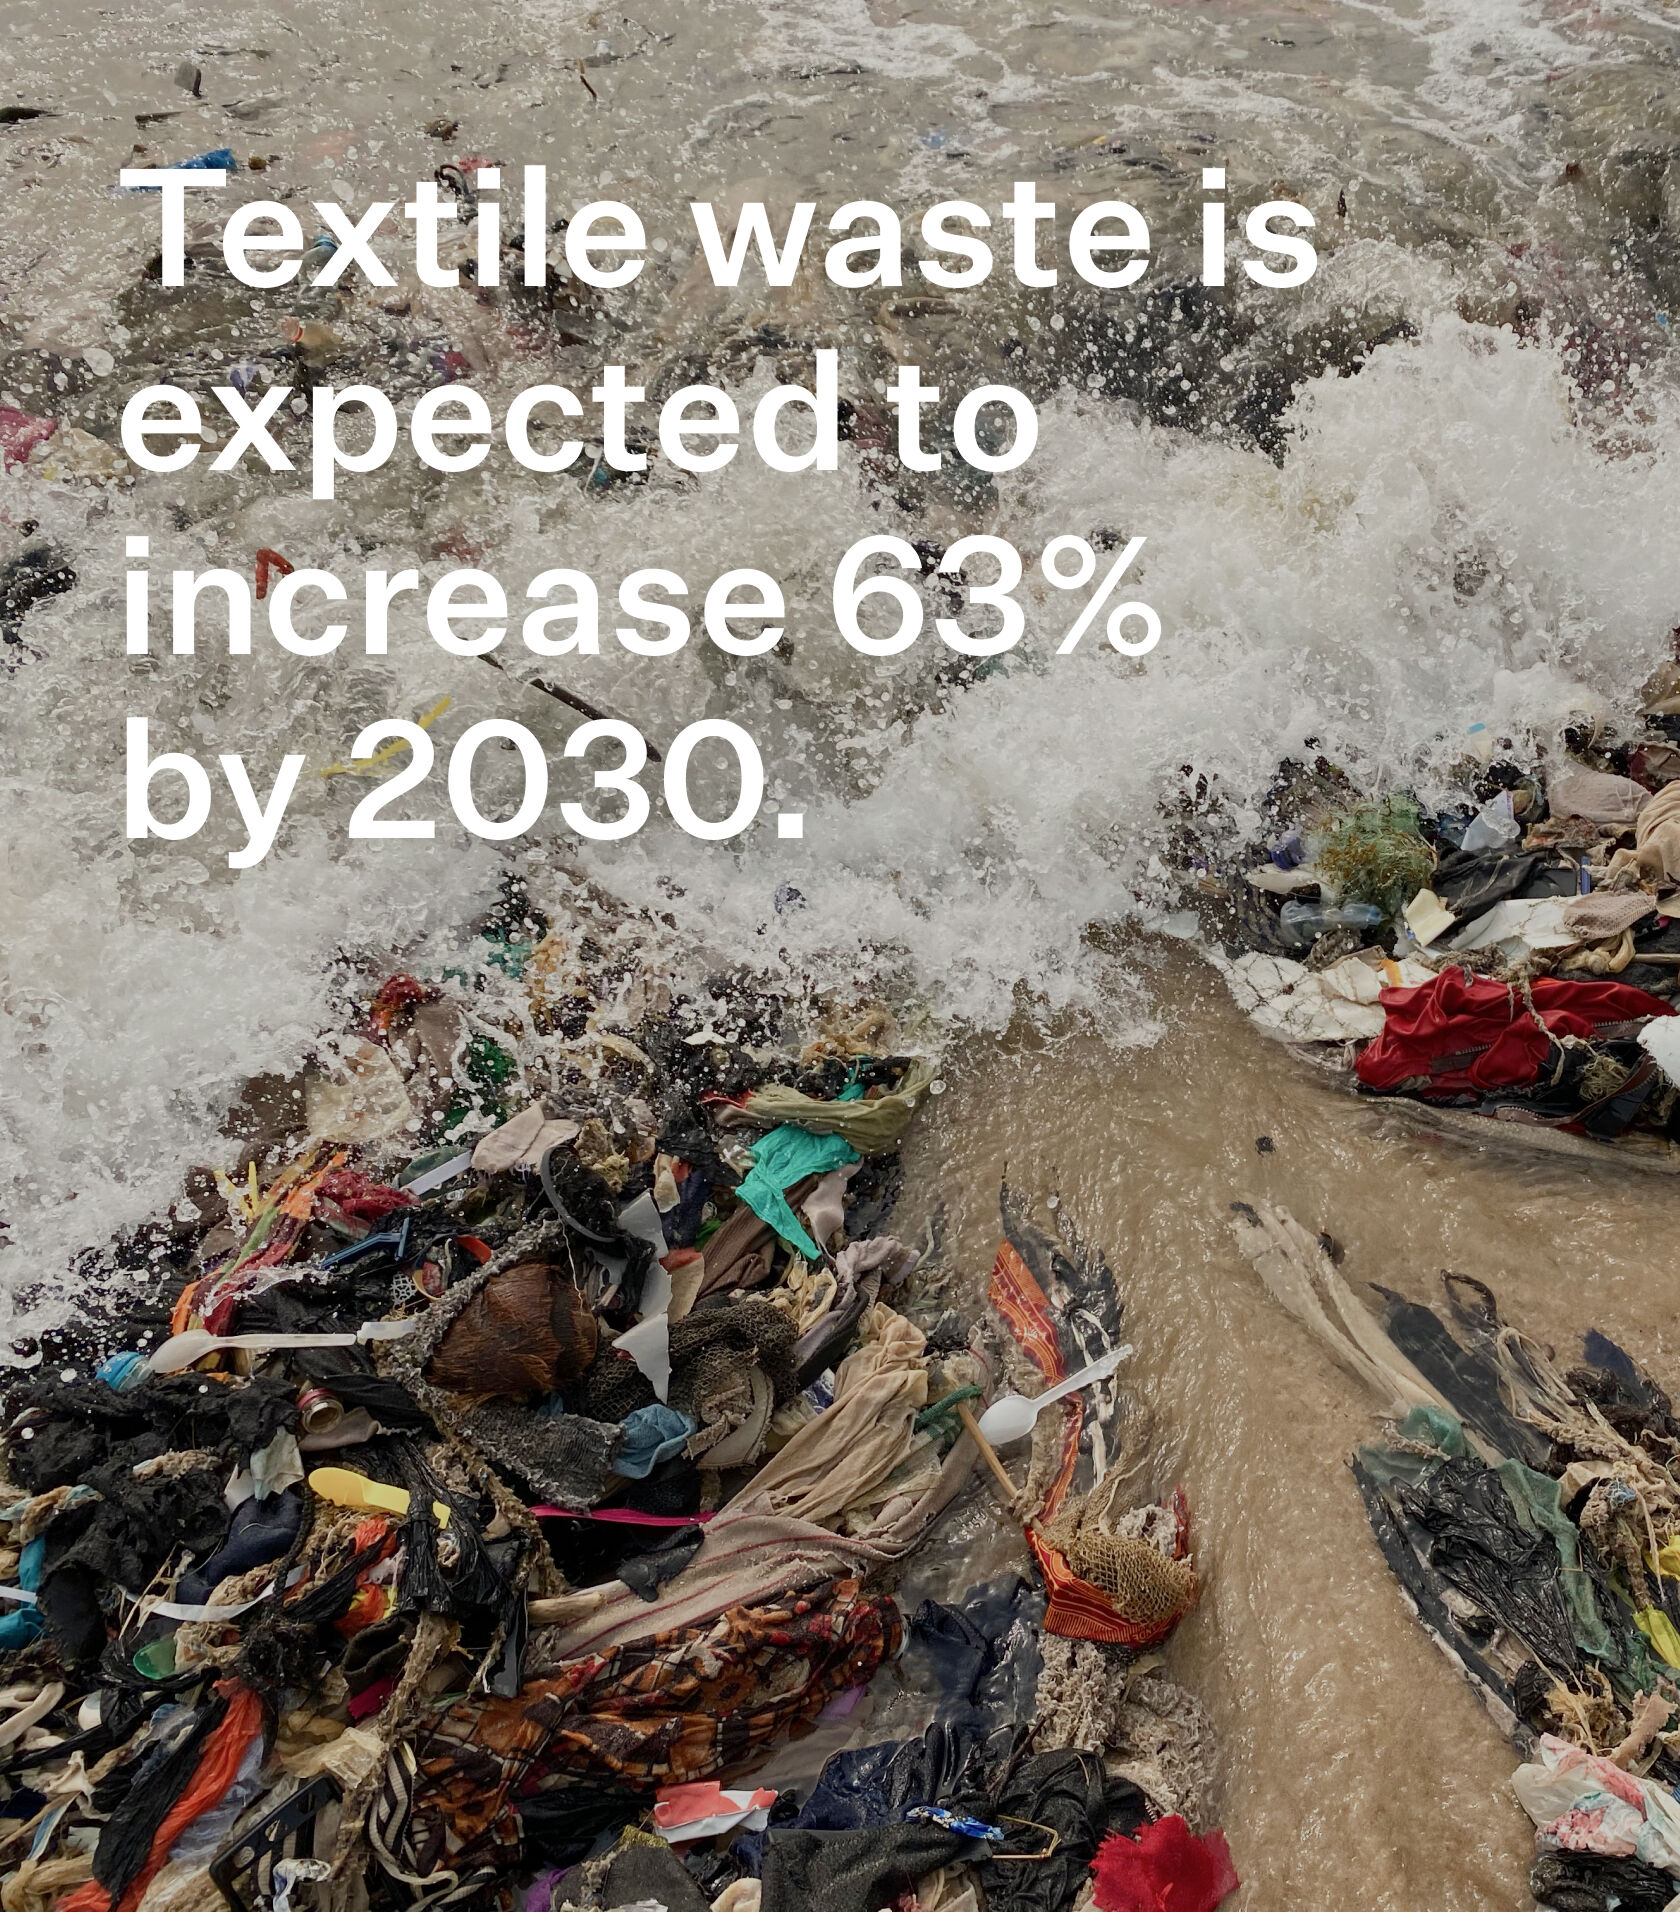 Textile waste polluting the ocean.